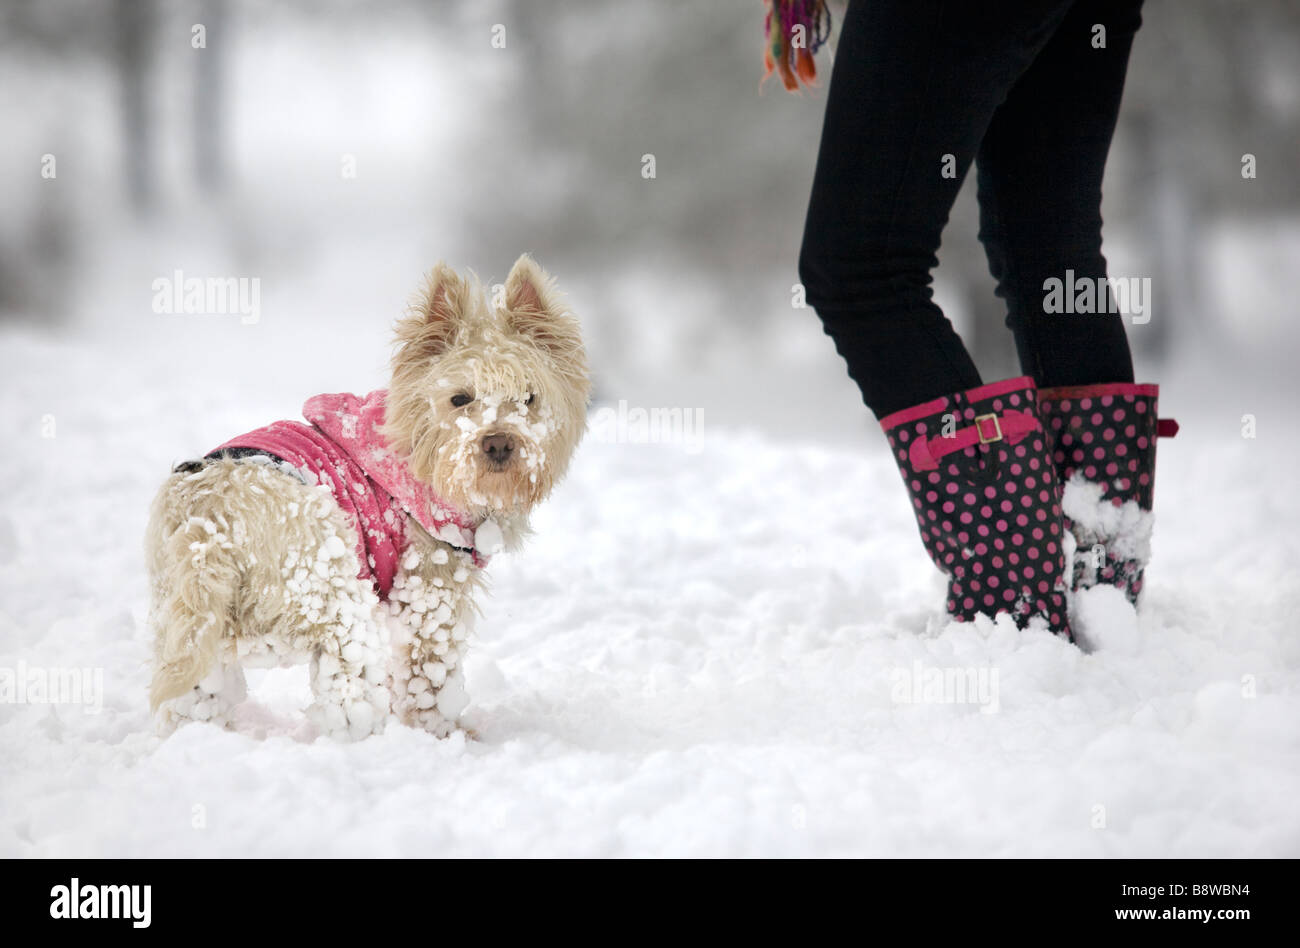 Dog in winter coat standing in the snow with its owner Stock Photo